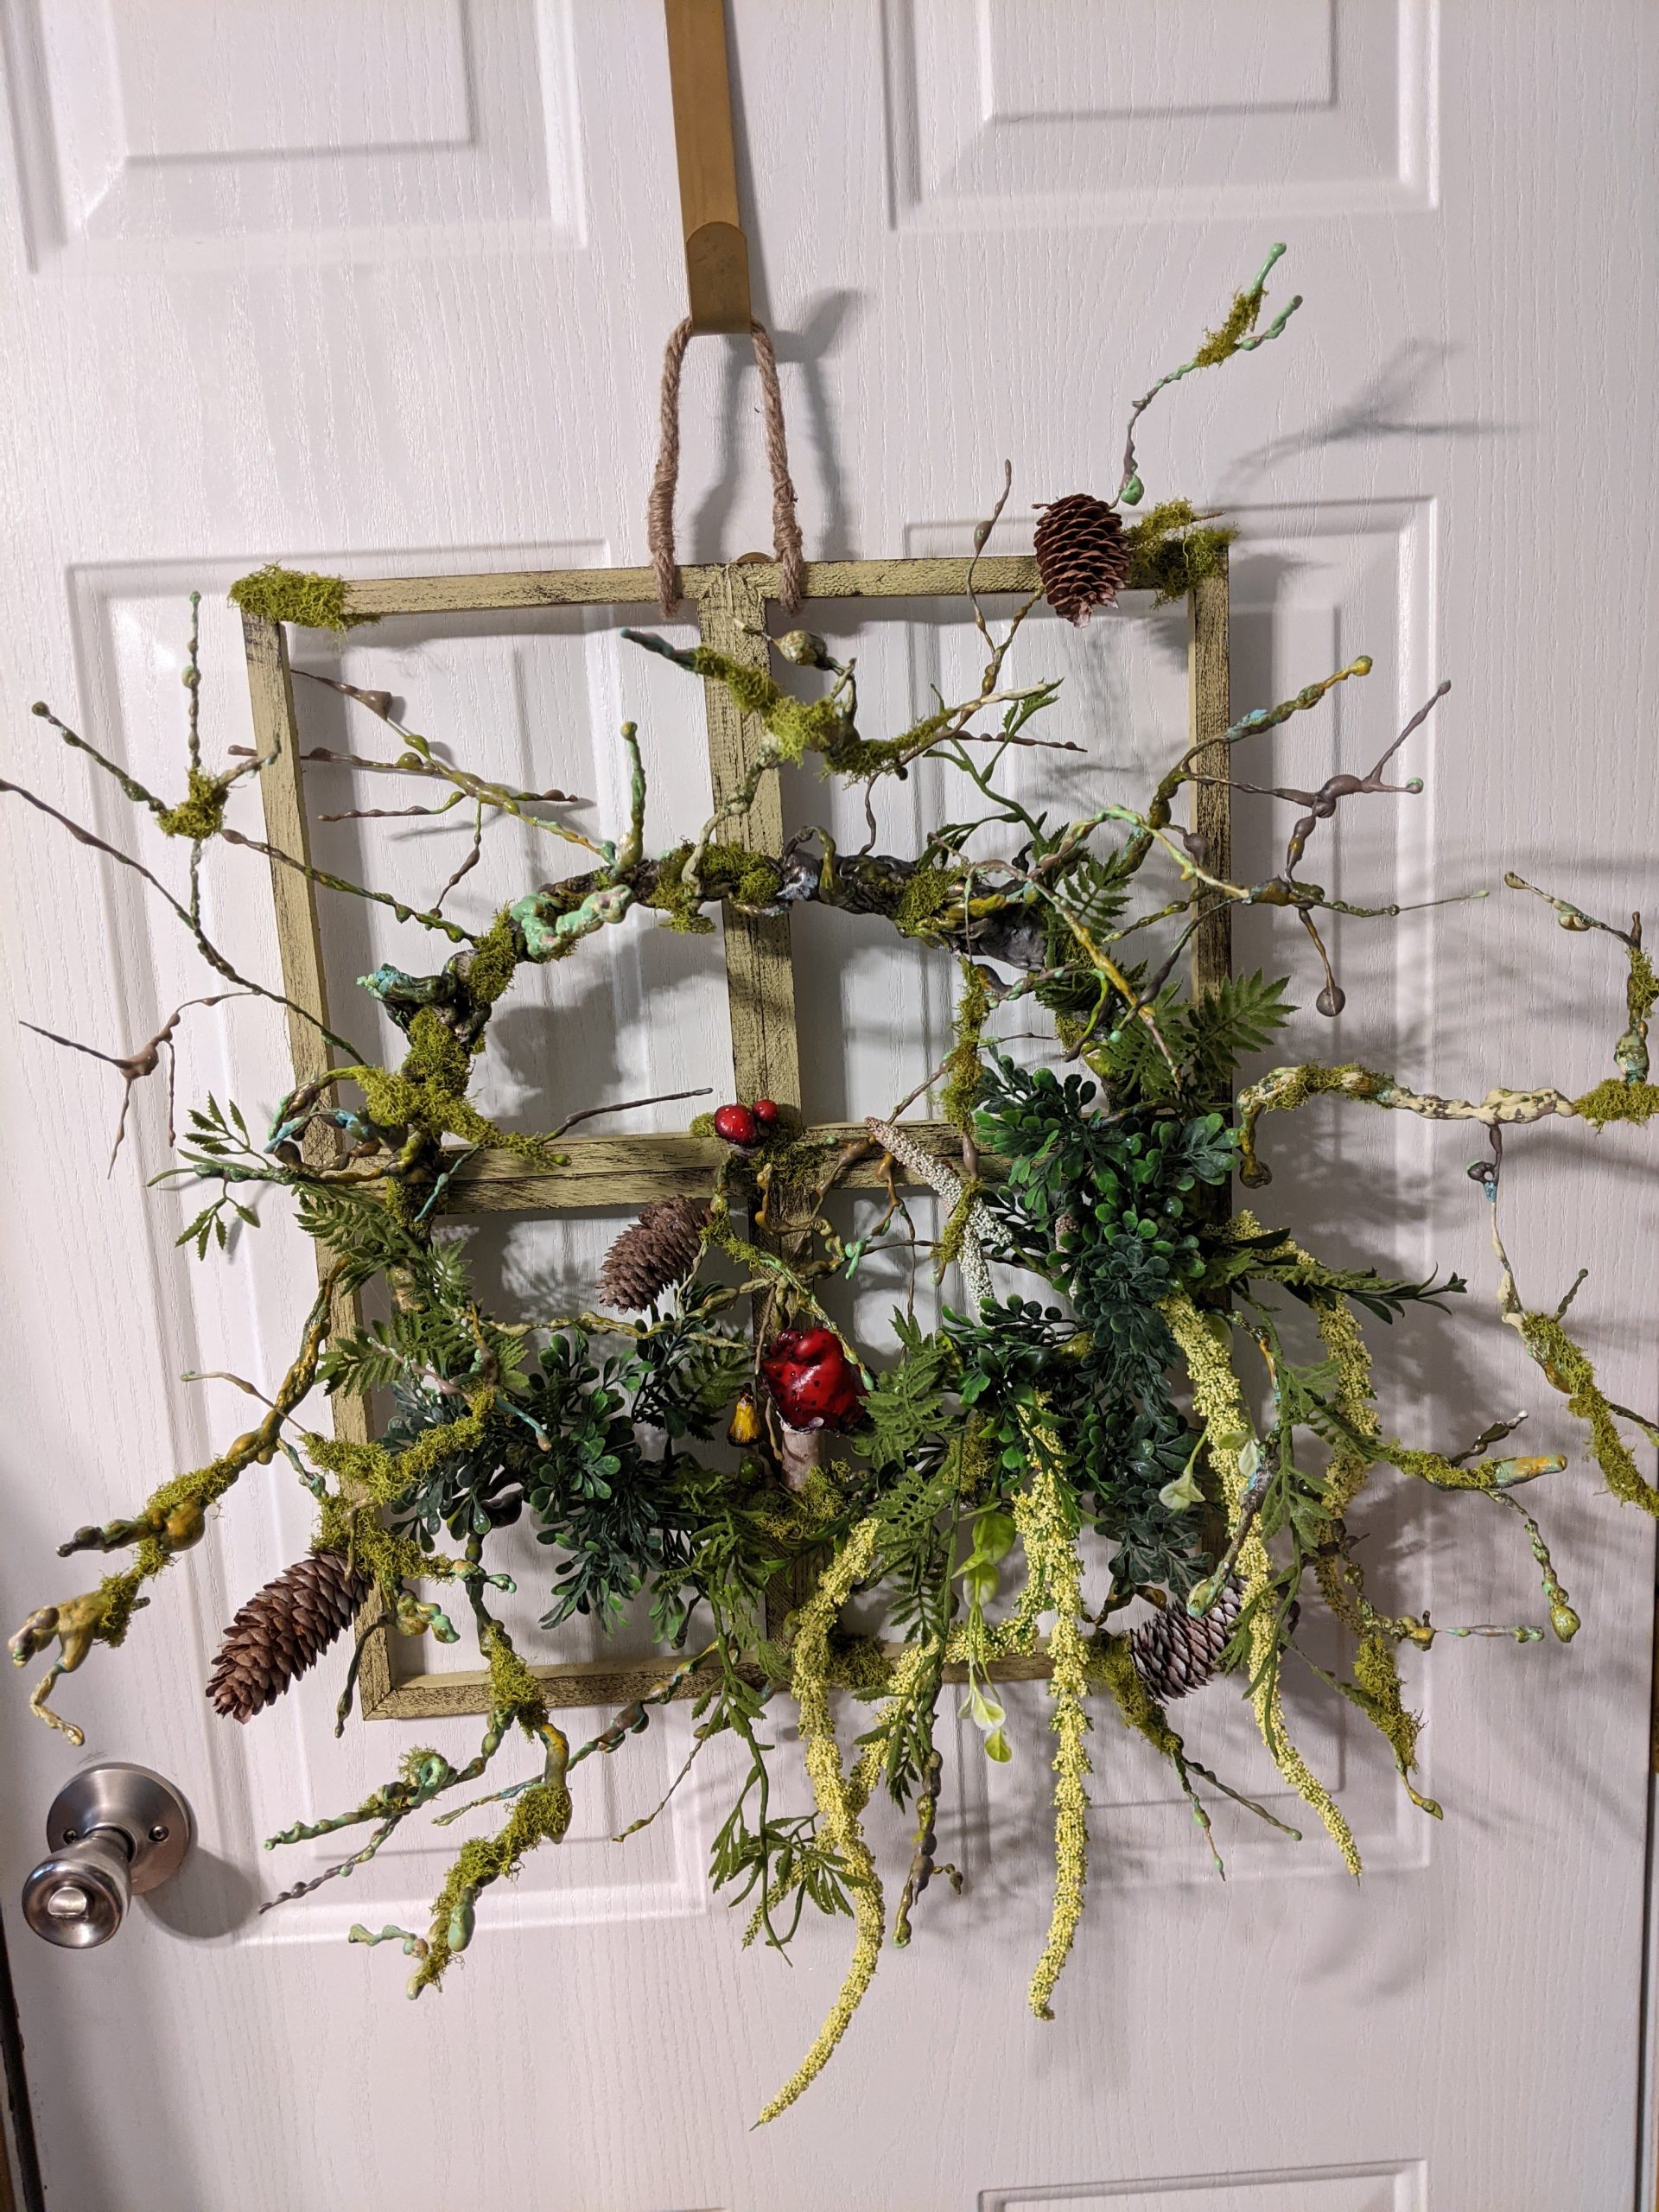 Window pain wreath with natural and hand sculpted elements.